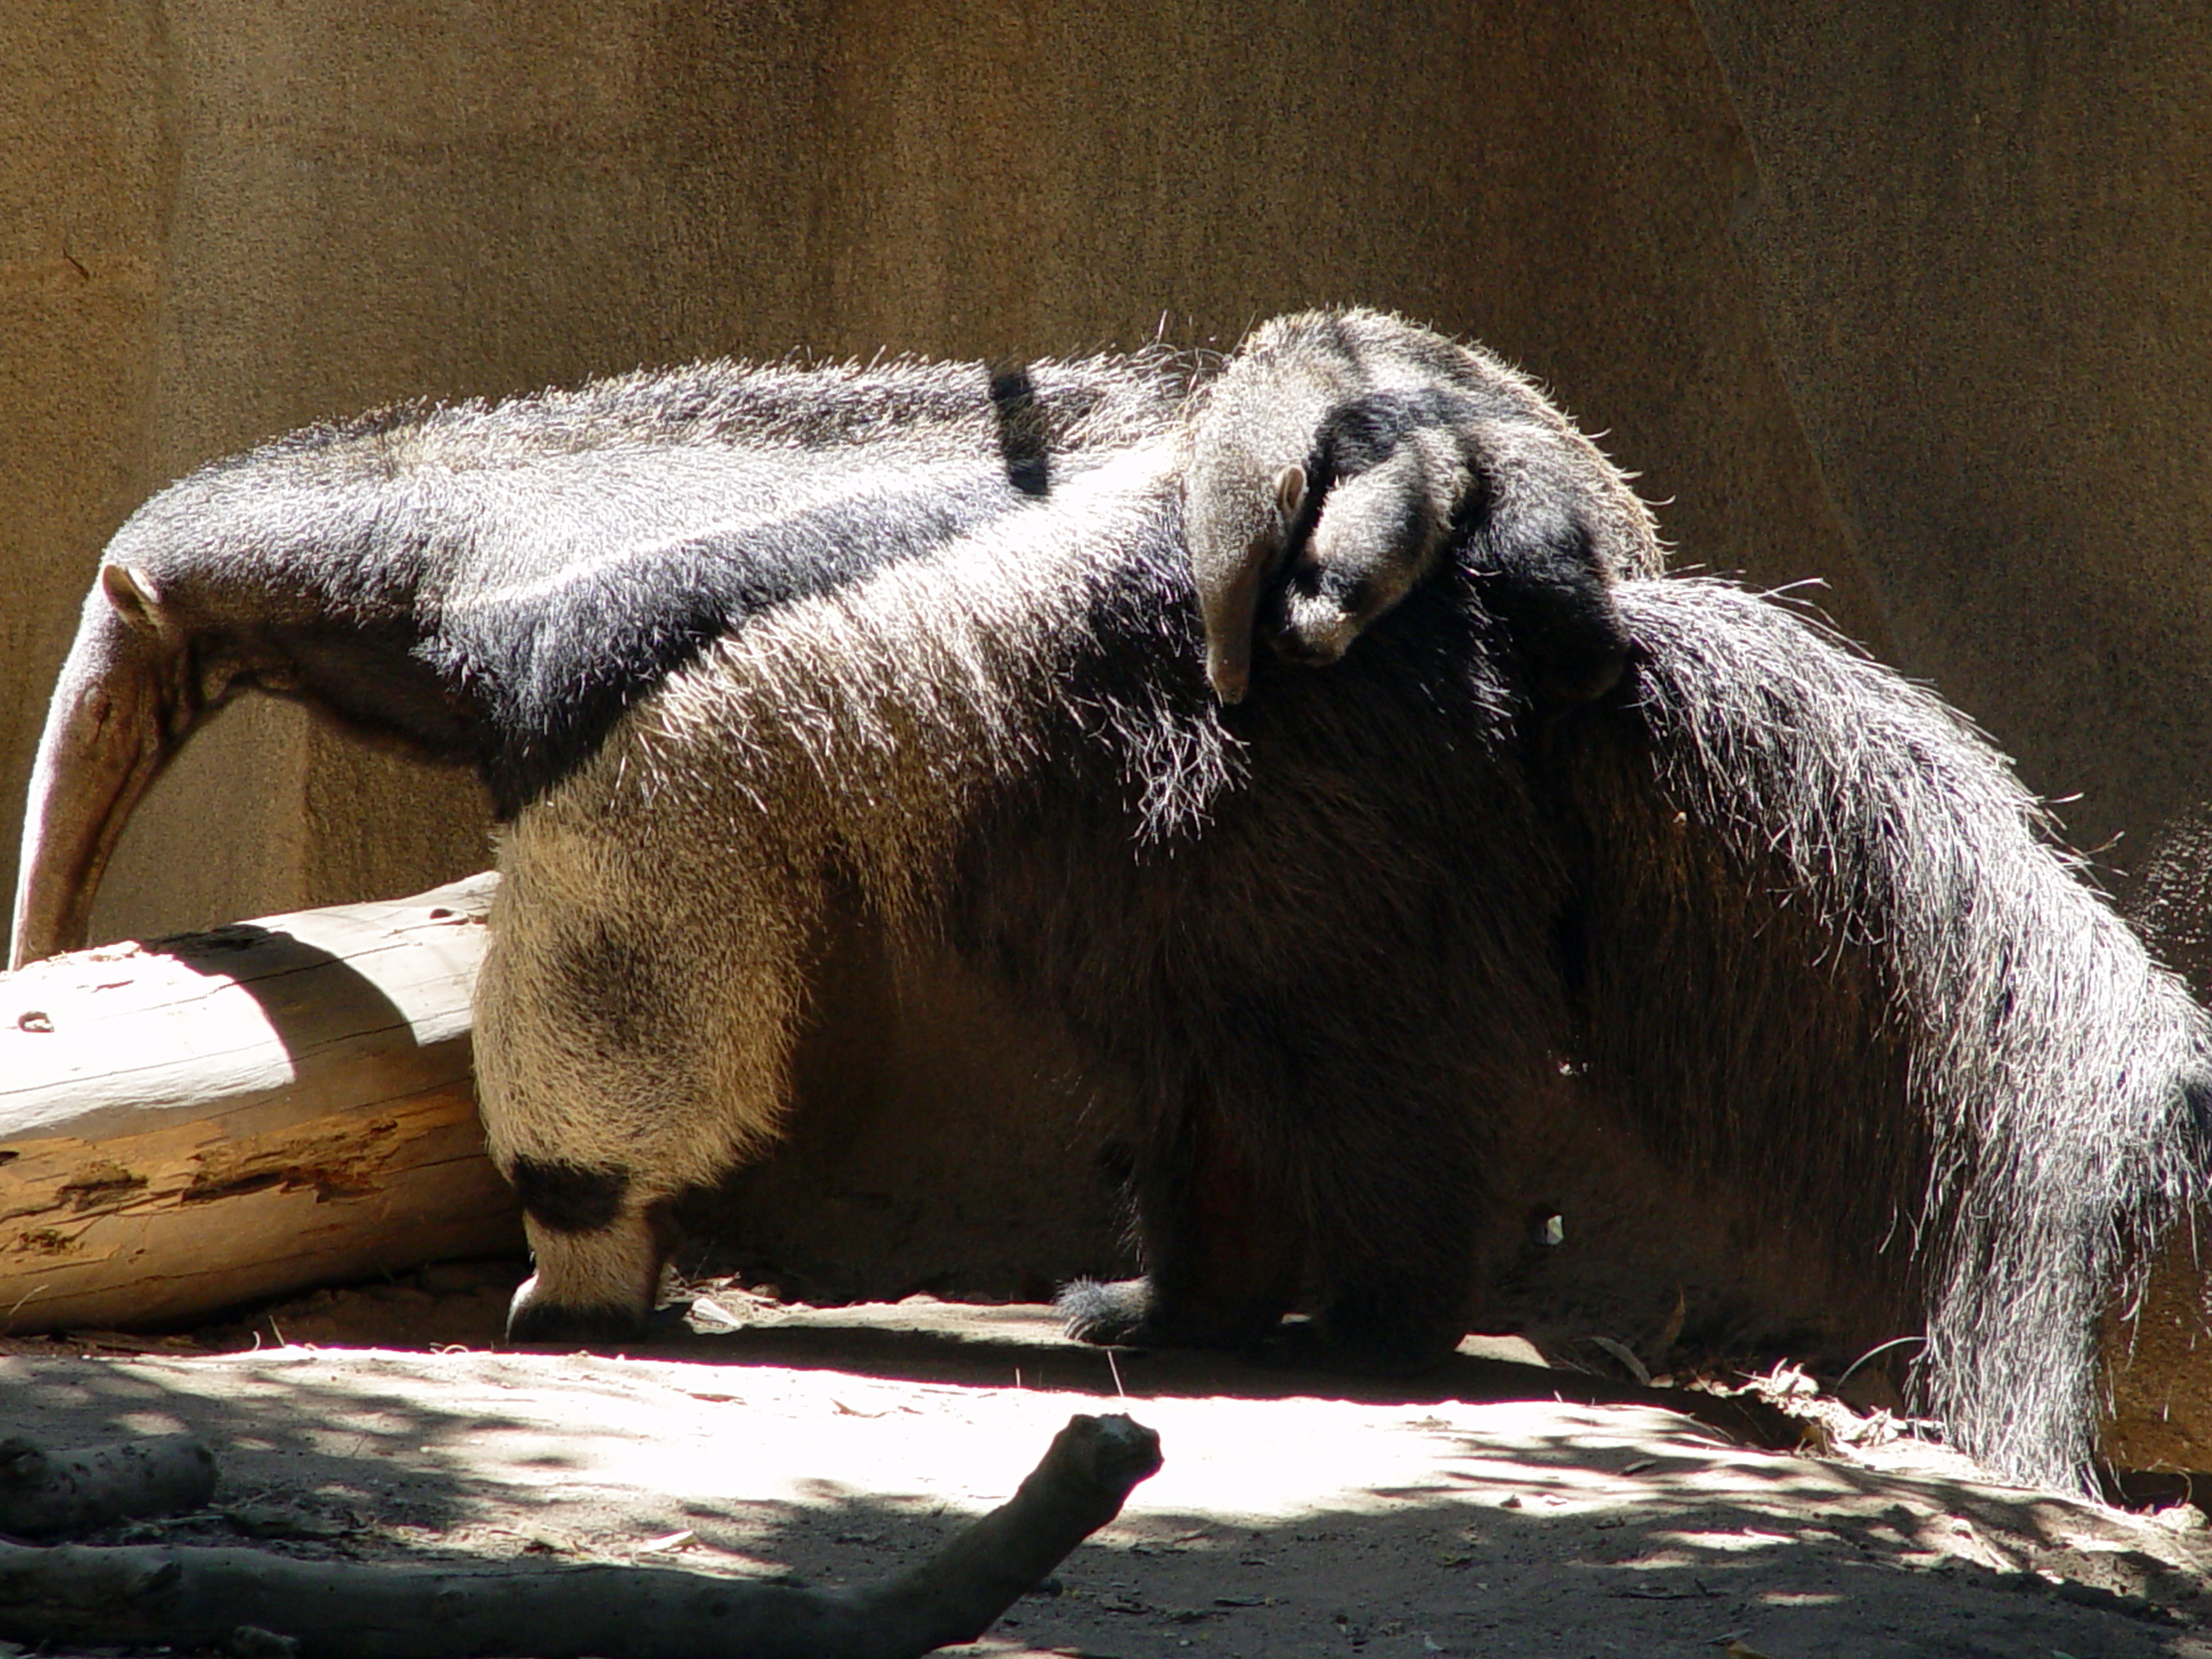 giant anteater images